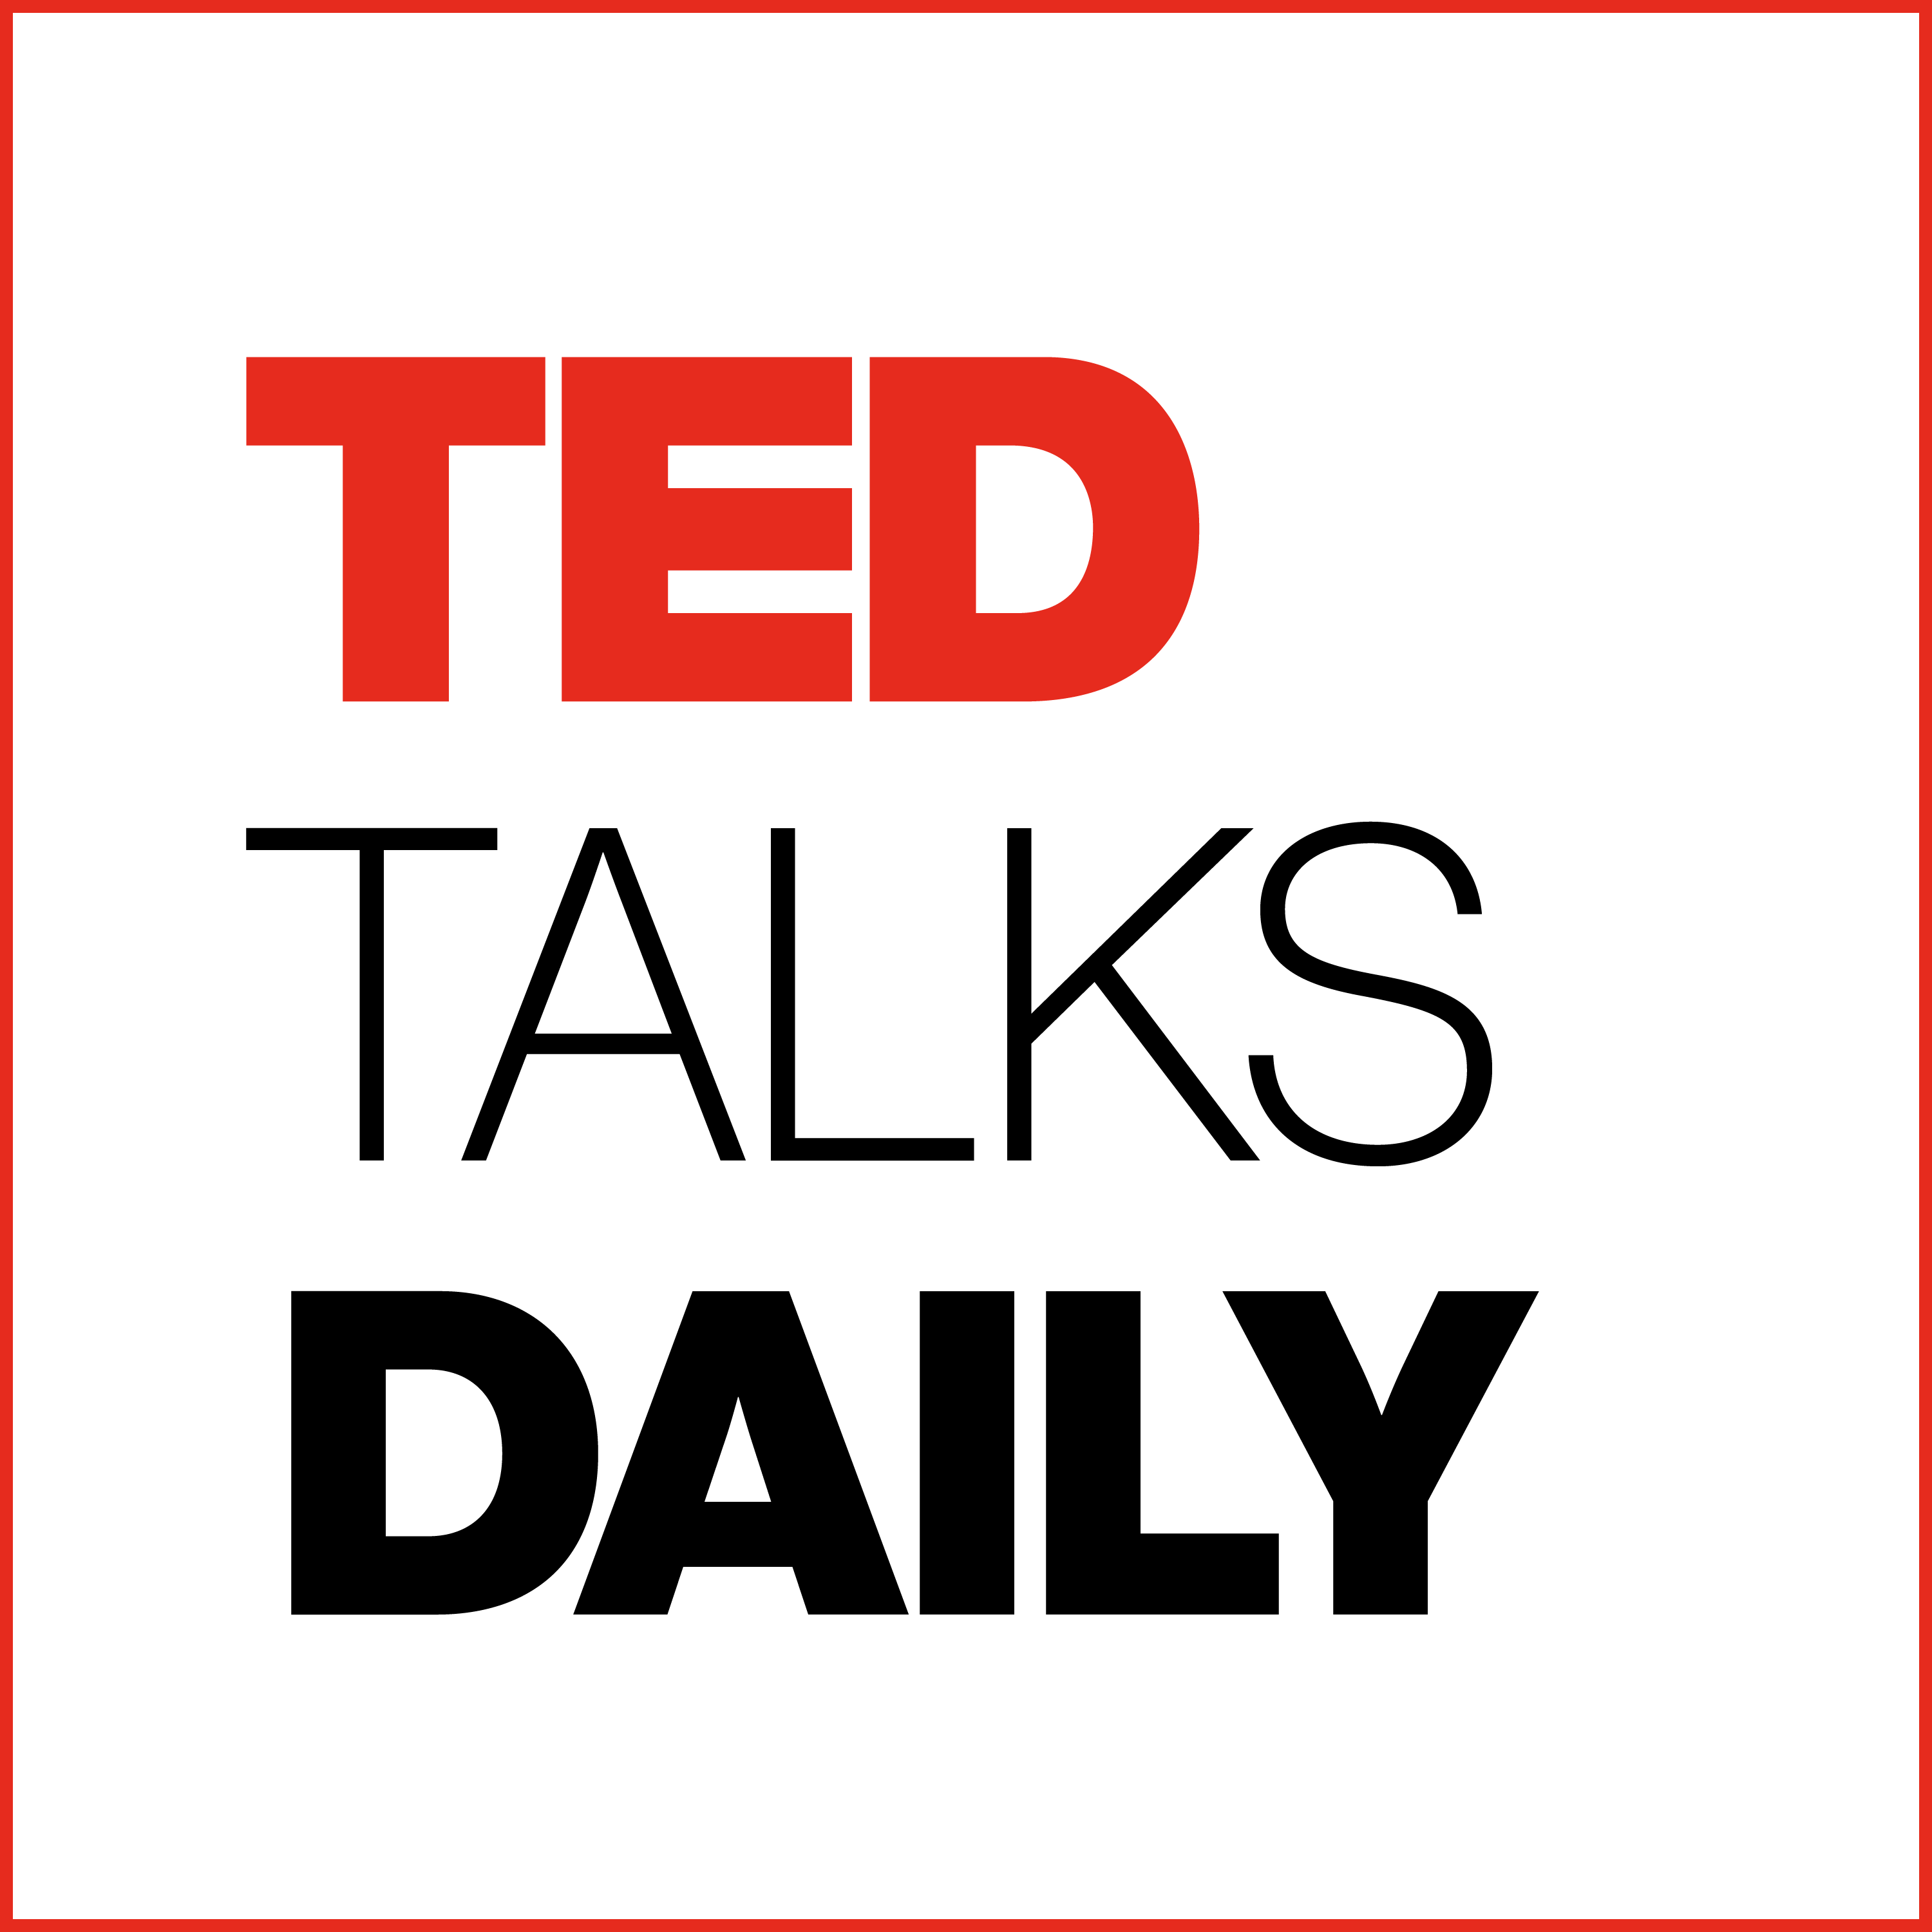 TED.com Logo - TED Talks audio | TED Talks | Programs & Initiatives | About | TED